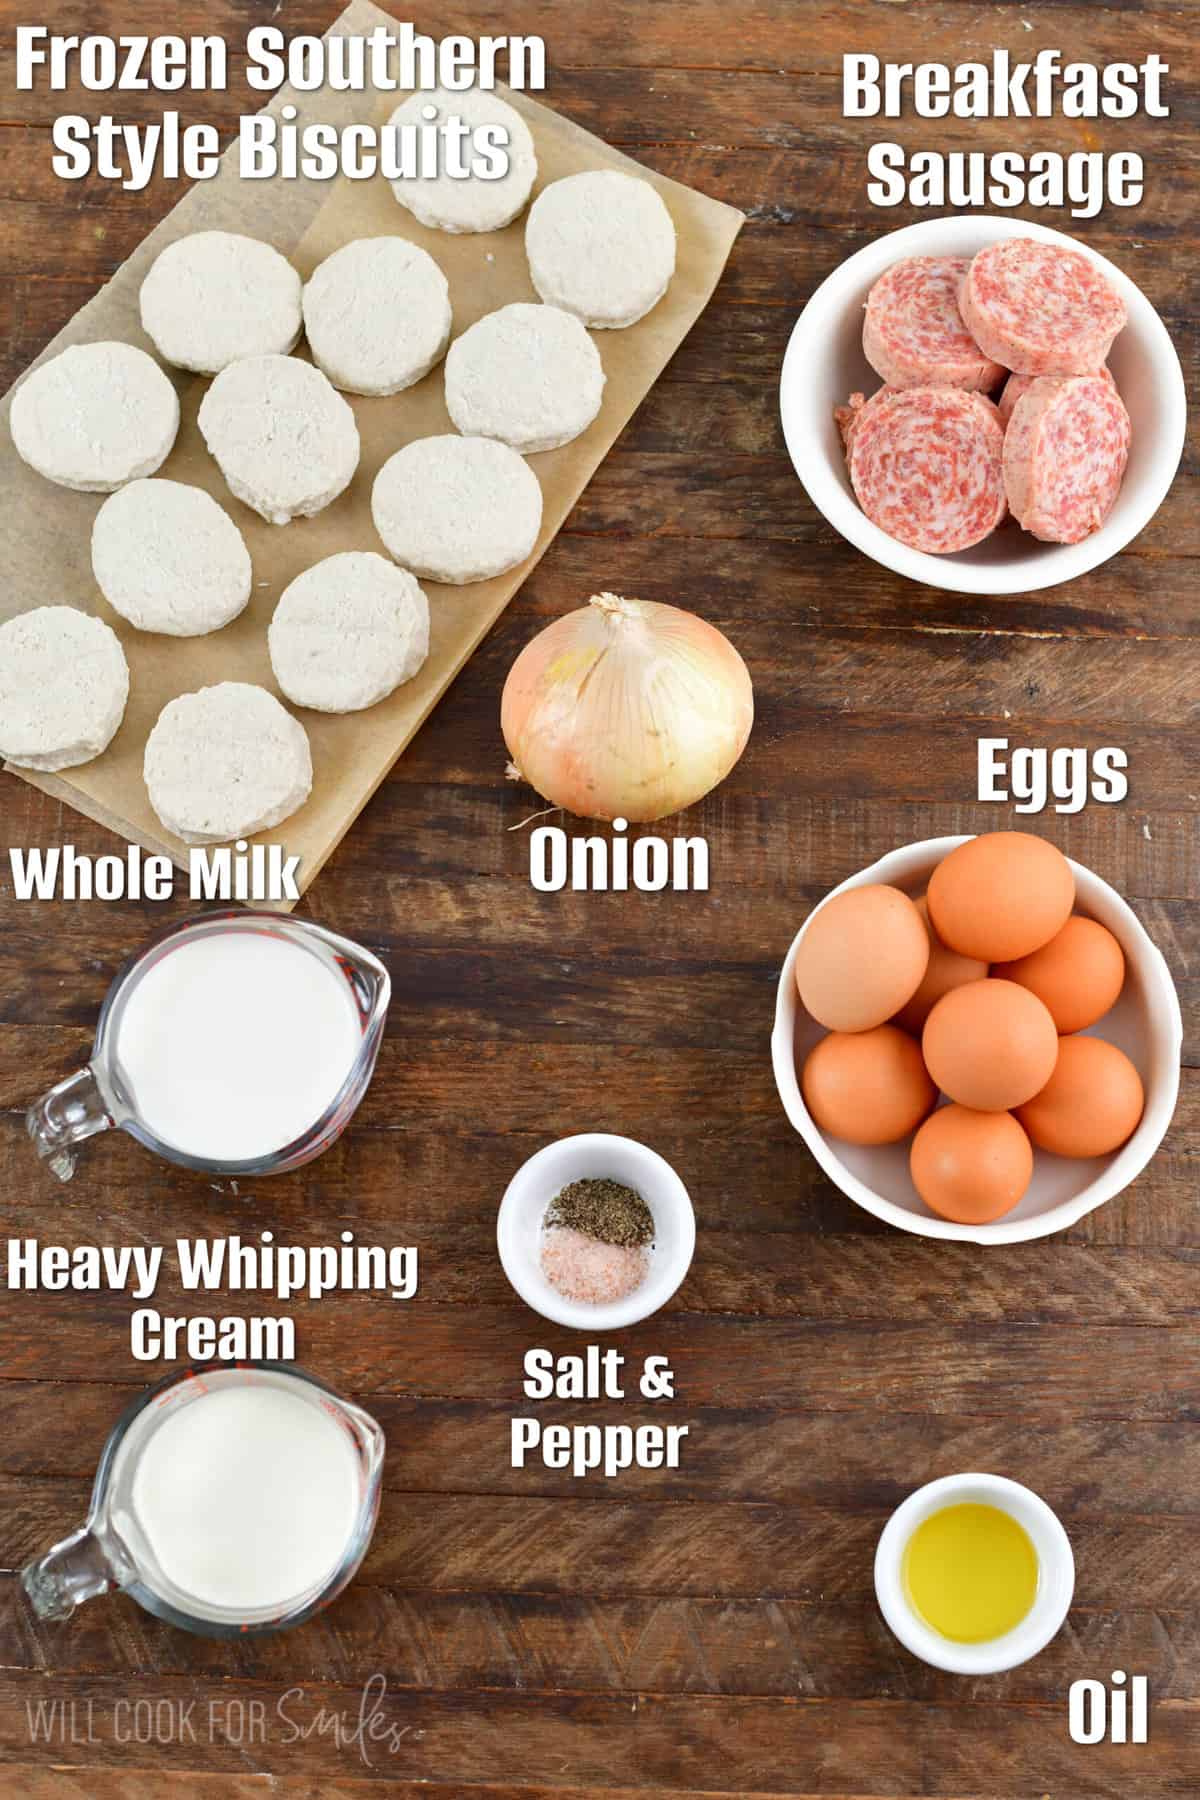 Labeled ingredients for sausage biscuits on a wood surface.